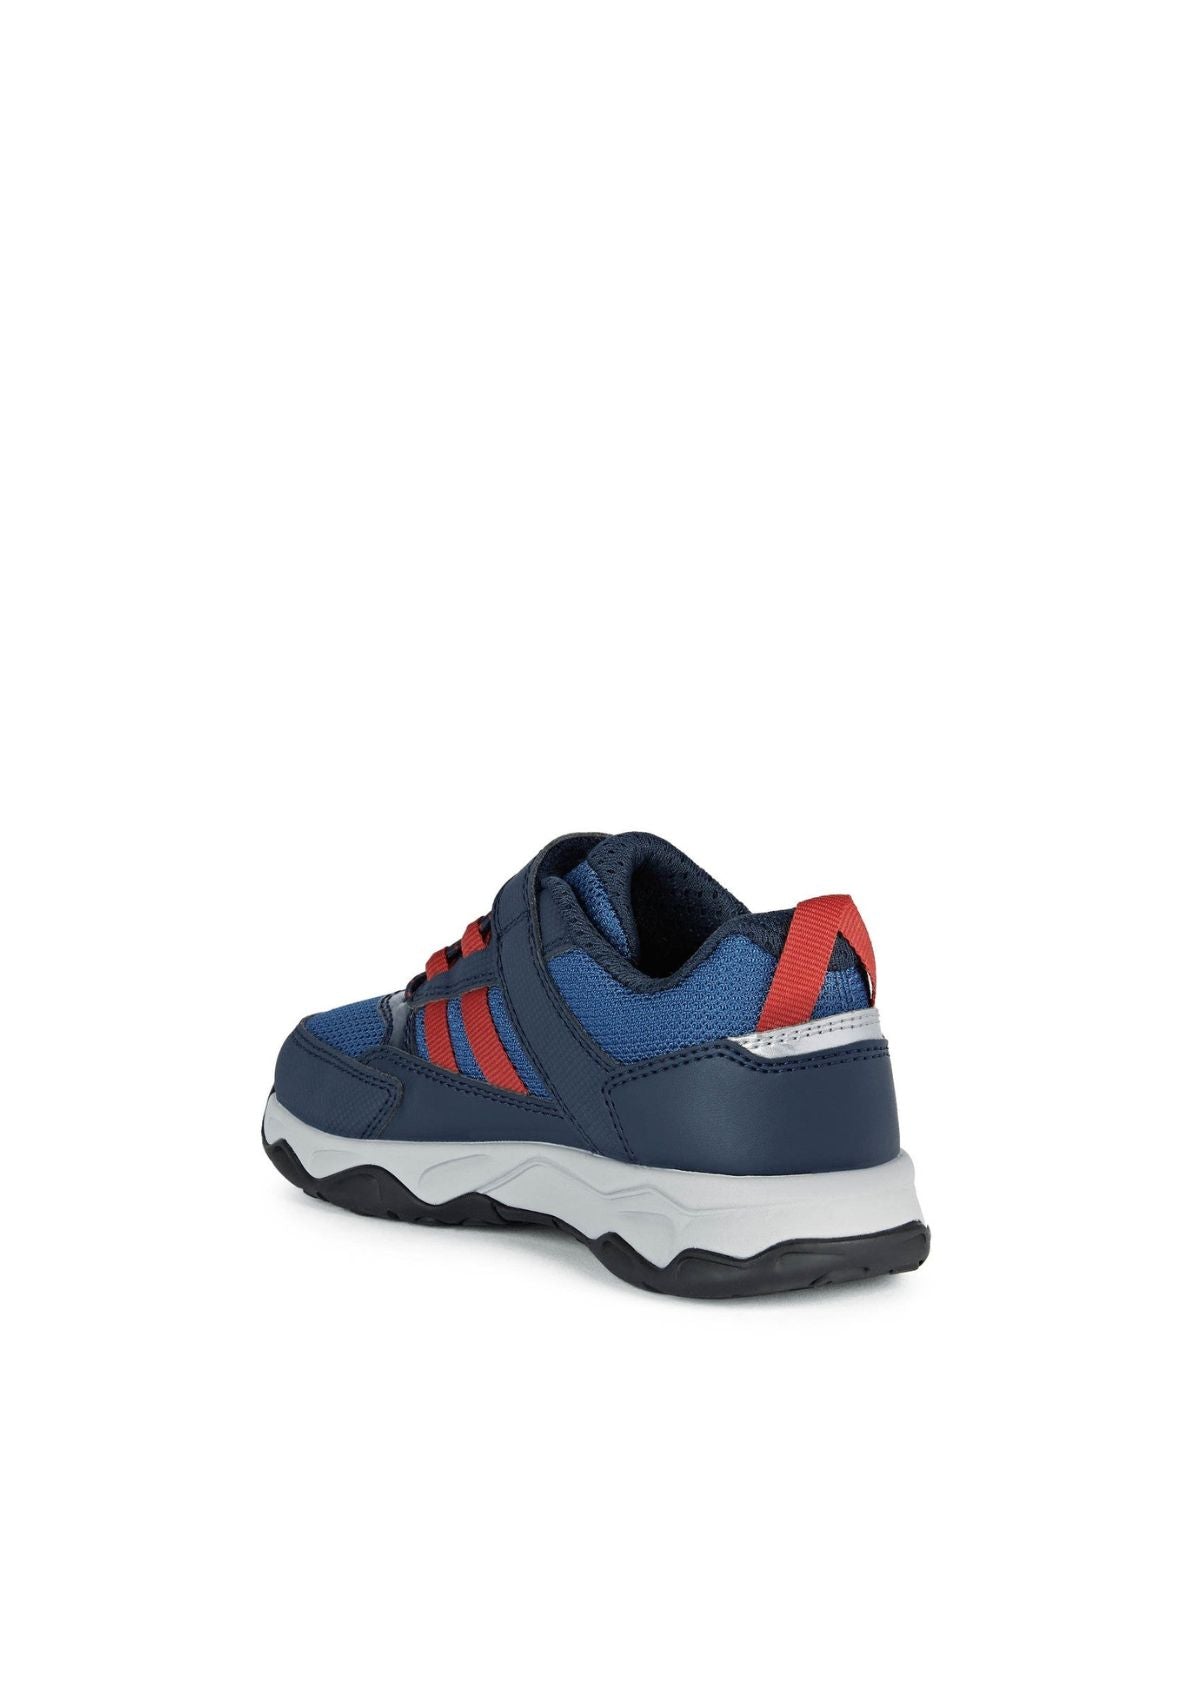 Geox Boys CALCO Navy Red back